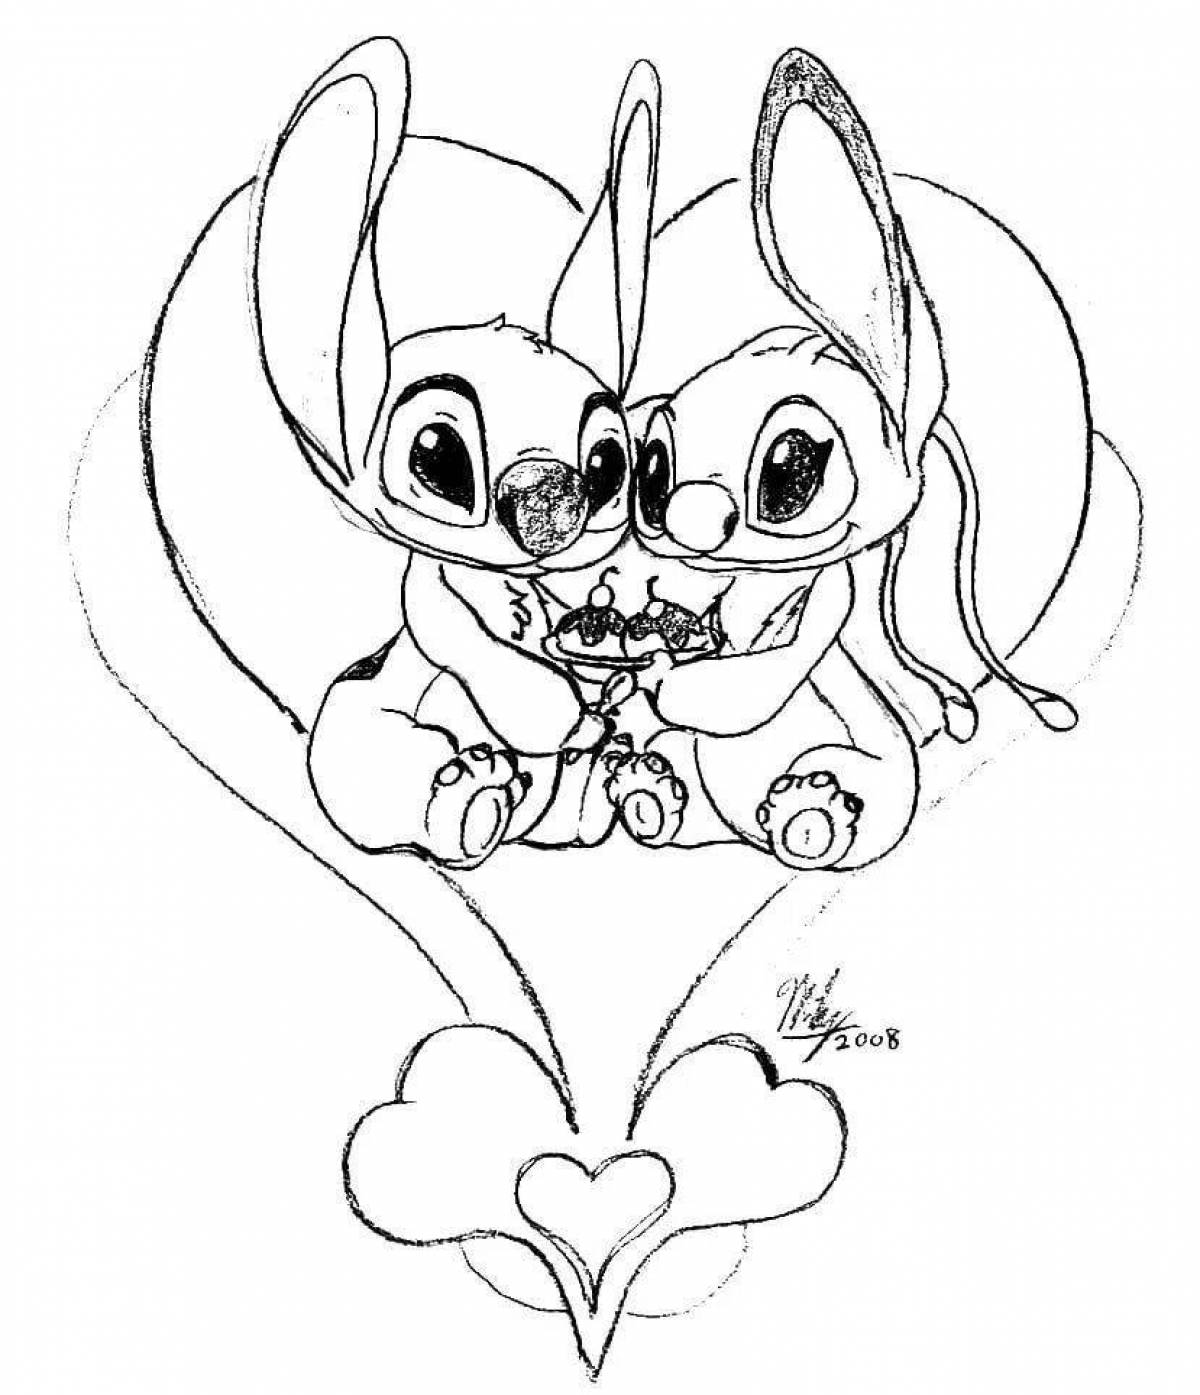 Vivacious stitch and angel coloring page